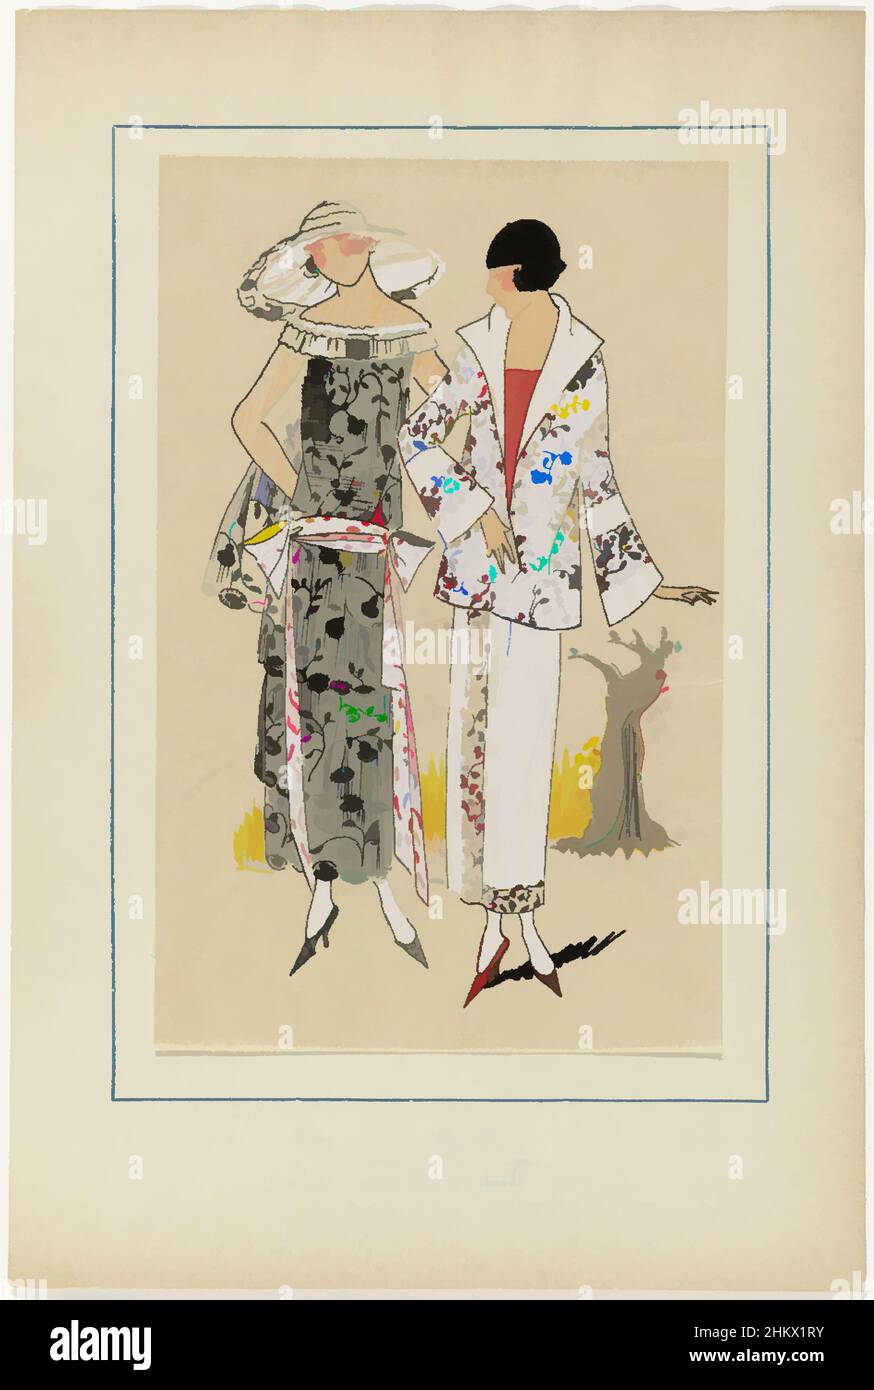 Art inspired by Très Parisien, 1923, No 6: 14. - TOKIO. - 1. Robe en laize de Chantilly..., 1. Dress of black 'laize de Chantilly' (lace); the skirt consists of flounces, the back appears to have a cape. 2. Costume (suit) of crepe Colette embroidered with red silk. Lace by V. Racine, Classic works modernized by Artotop with a splash of modernity. Shapes, color and value, eye-catching visual impact on art. Emotions through freedom of artworks in a contemporary way. A timeless message pursuing a wildly creative new direction. Artists turning to the digital medium and creating the Artotop NFT Stock Photo